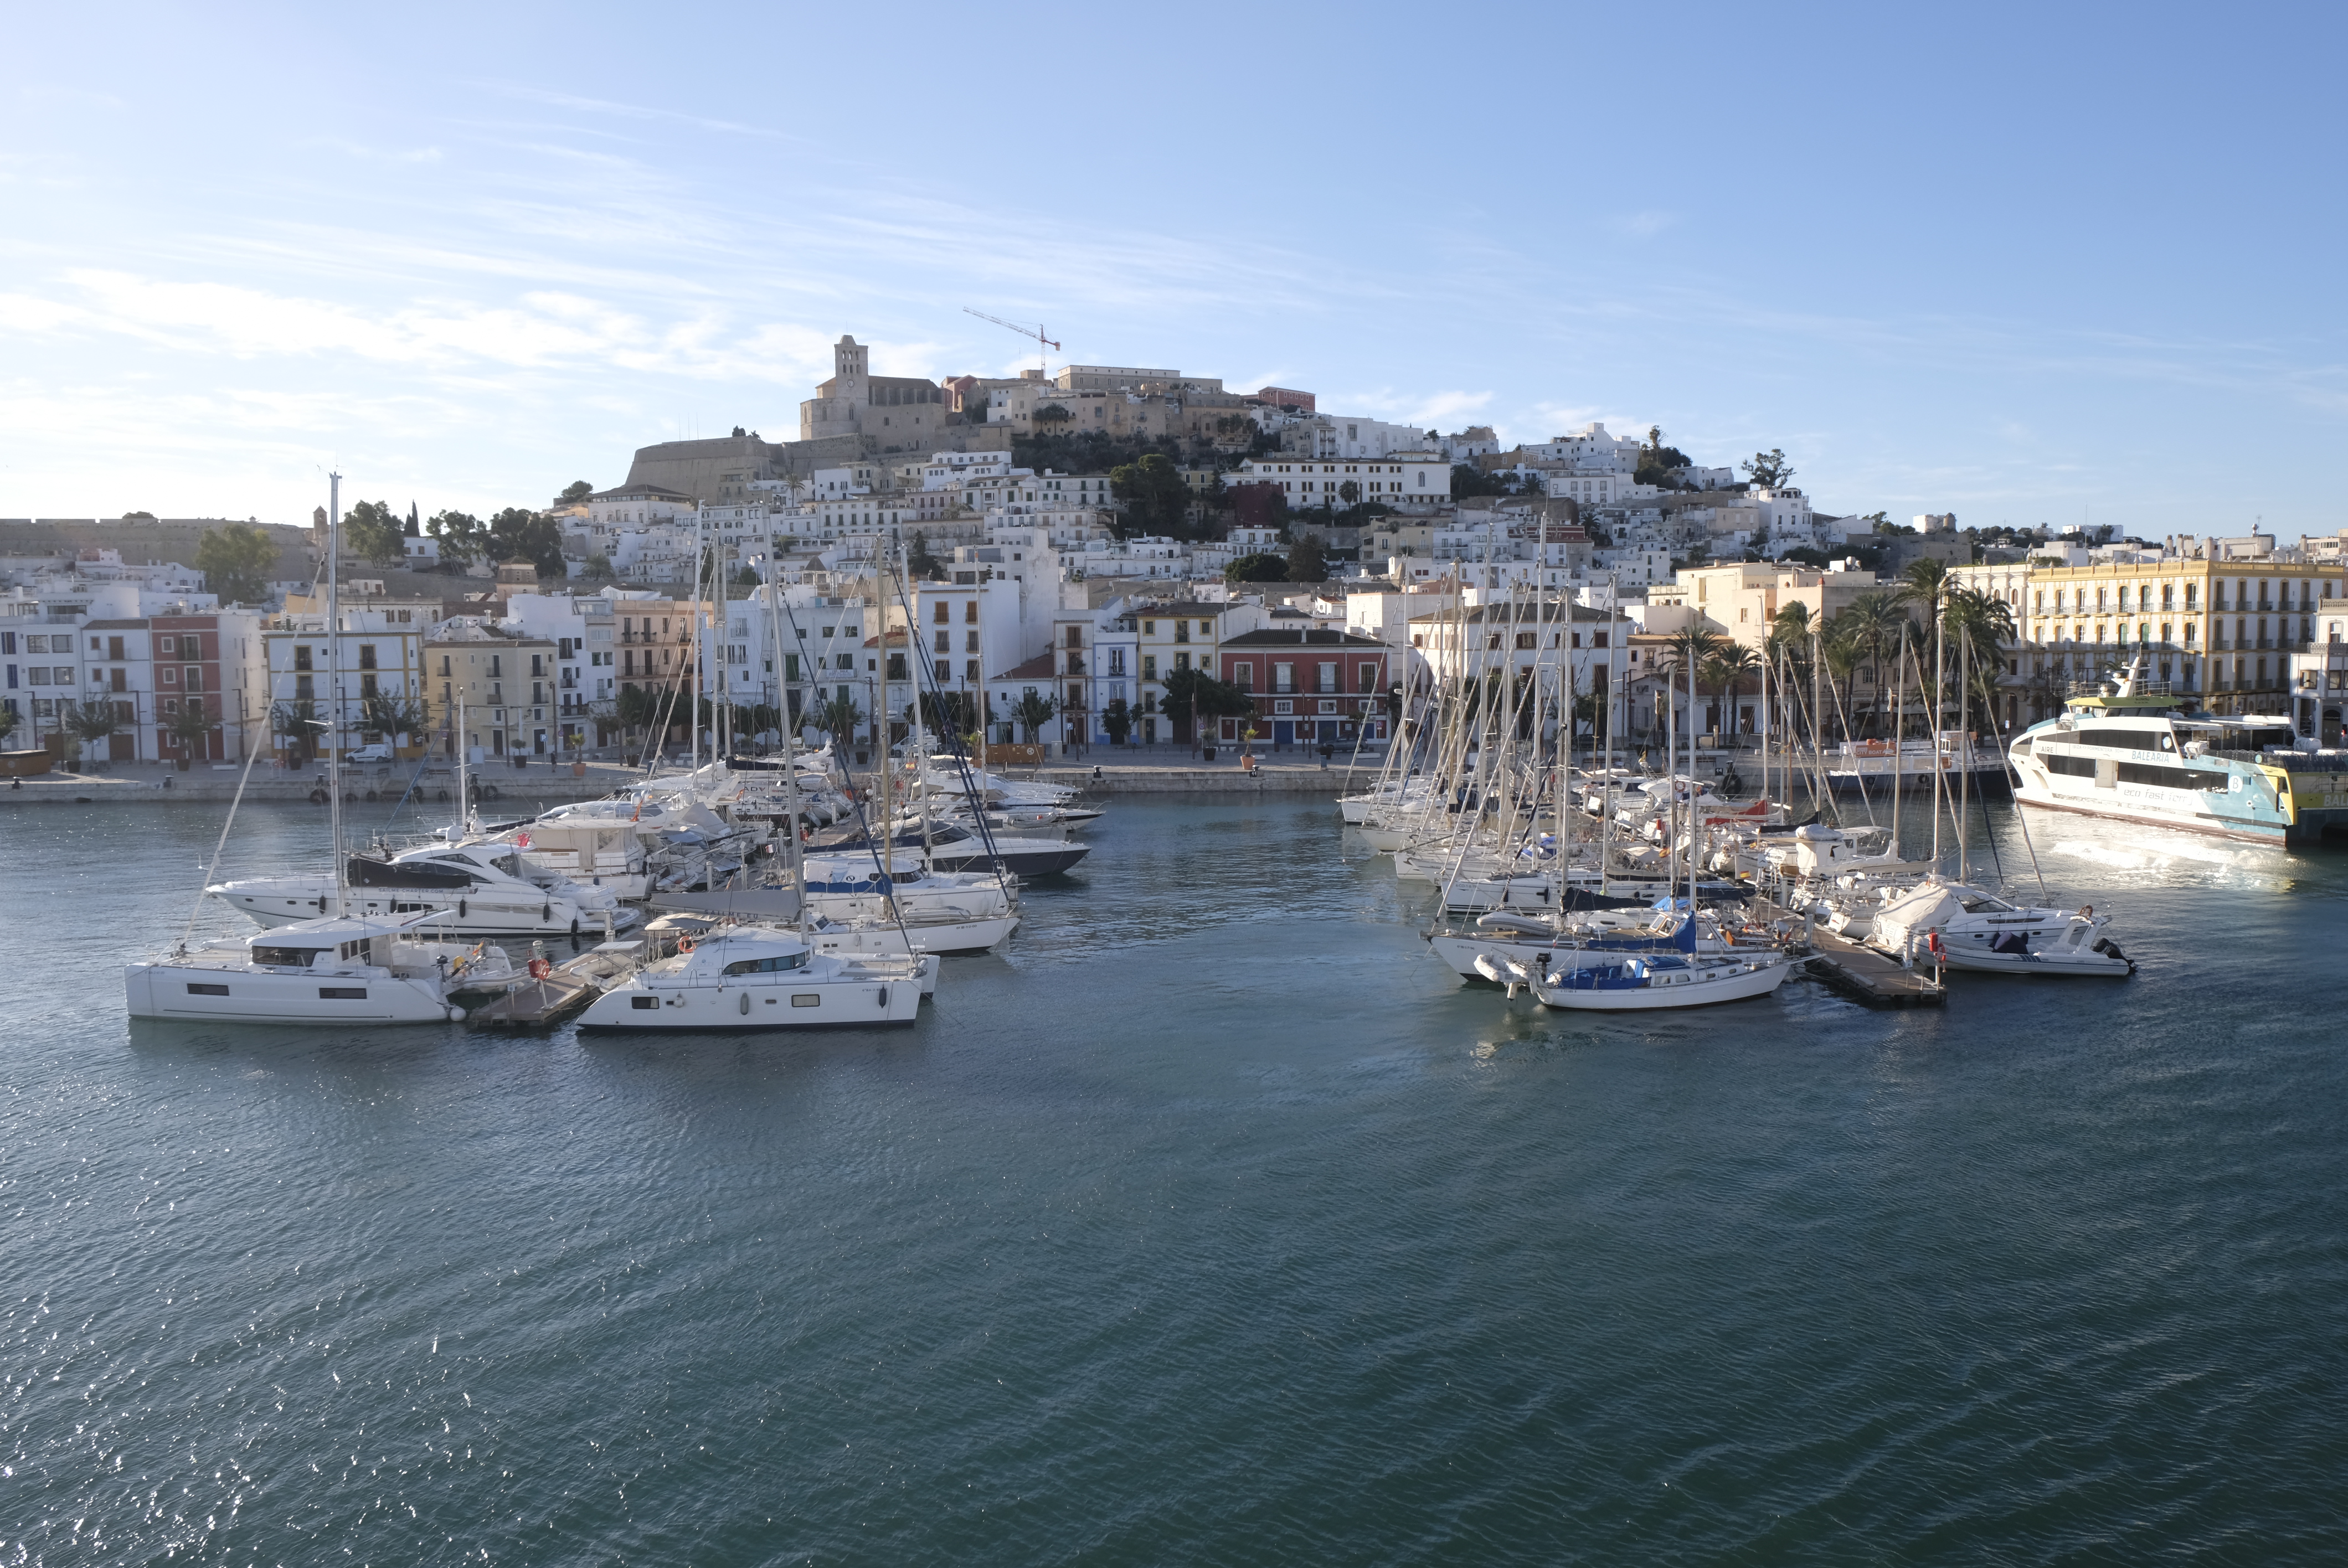 The port of Eivissa reduces the consumption of its water supply system by 50%